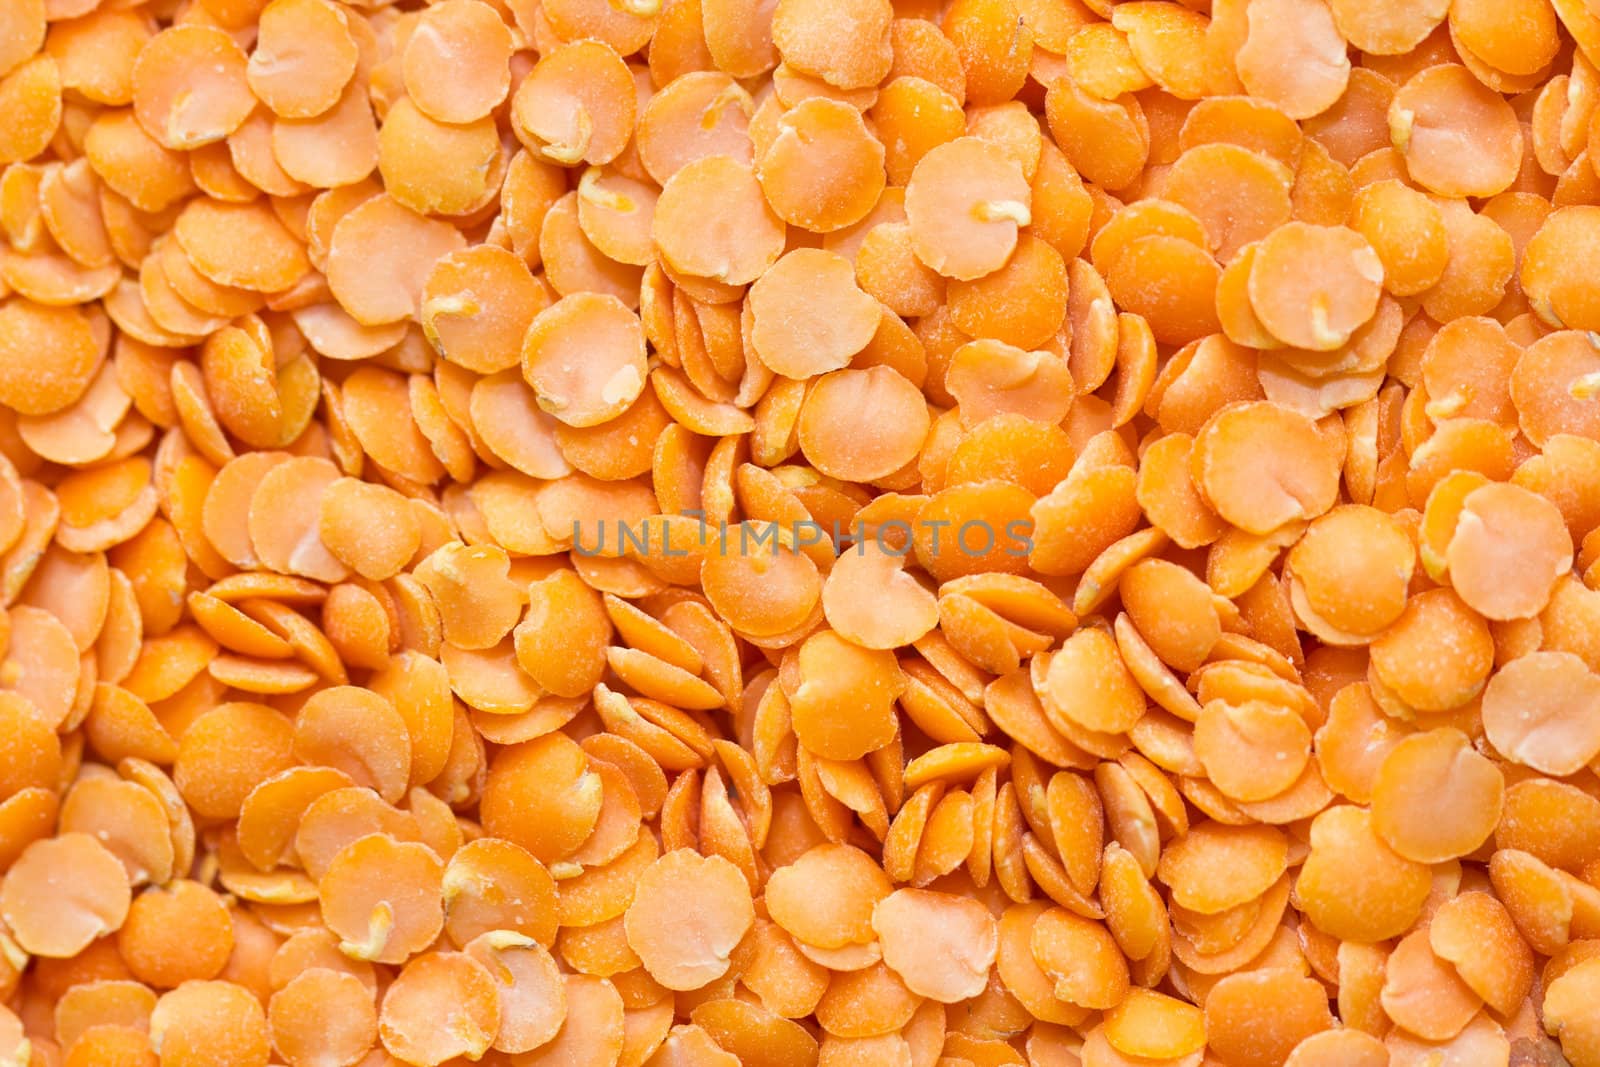 A background of raw red lentils